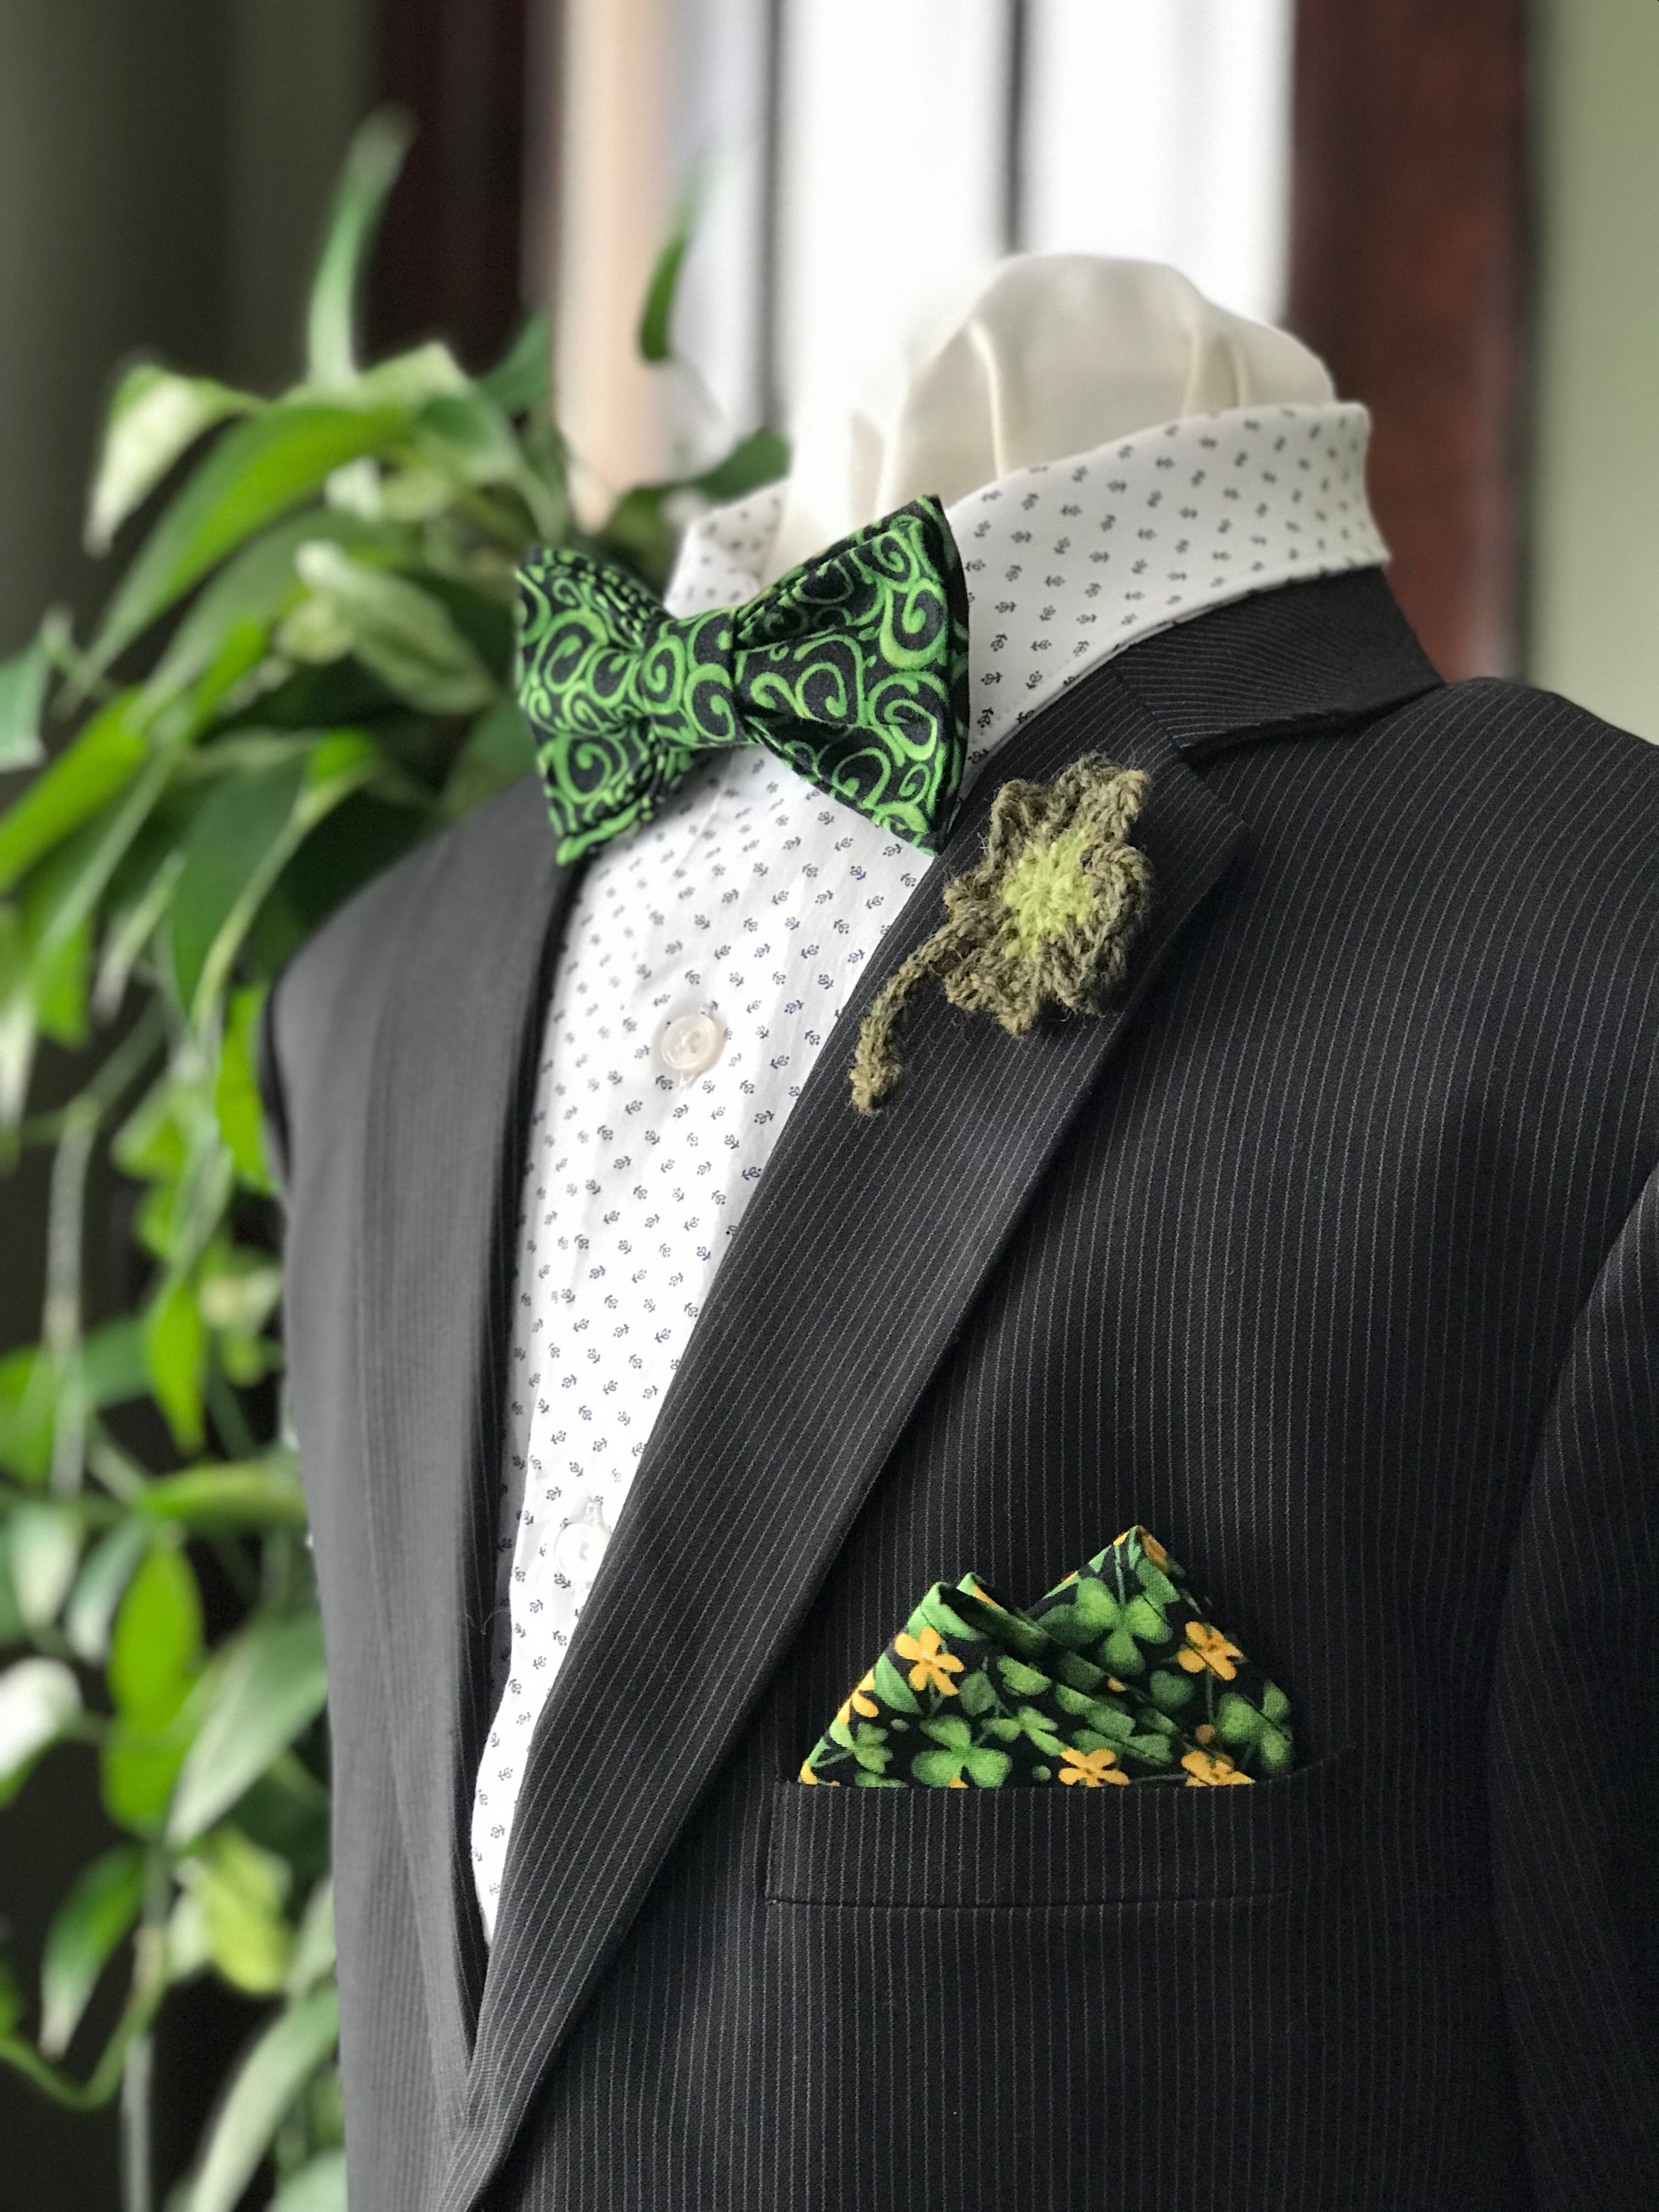 St. Patrick’s Day Gents Bow Tie, Pocket Square, and Lapel Pin Set